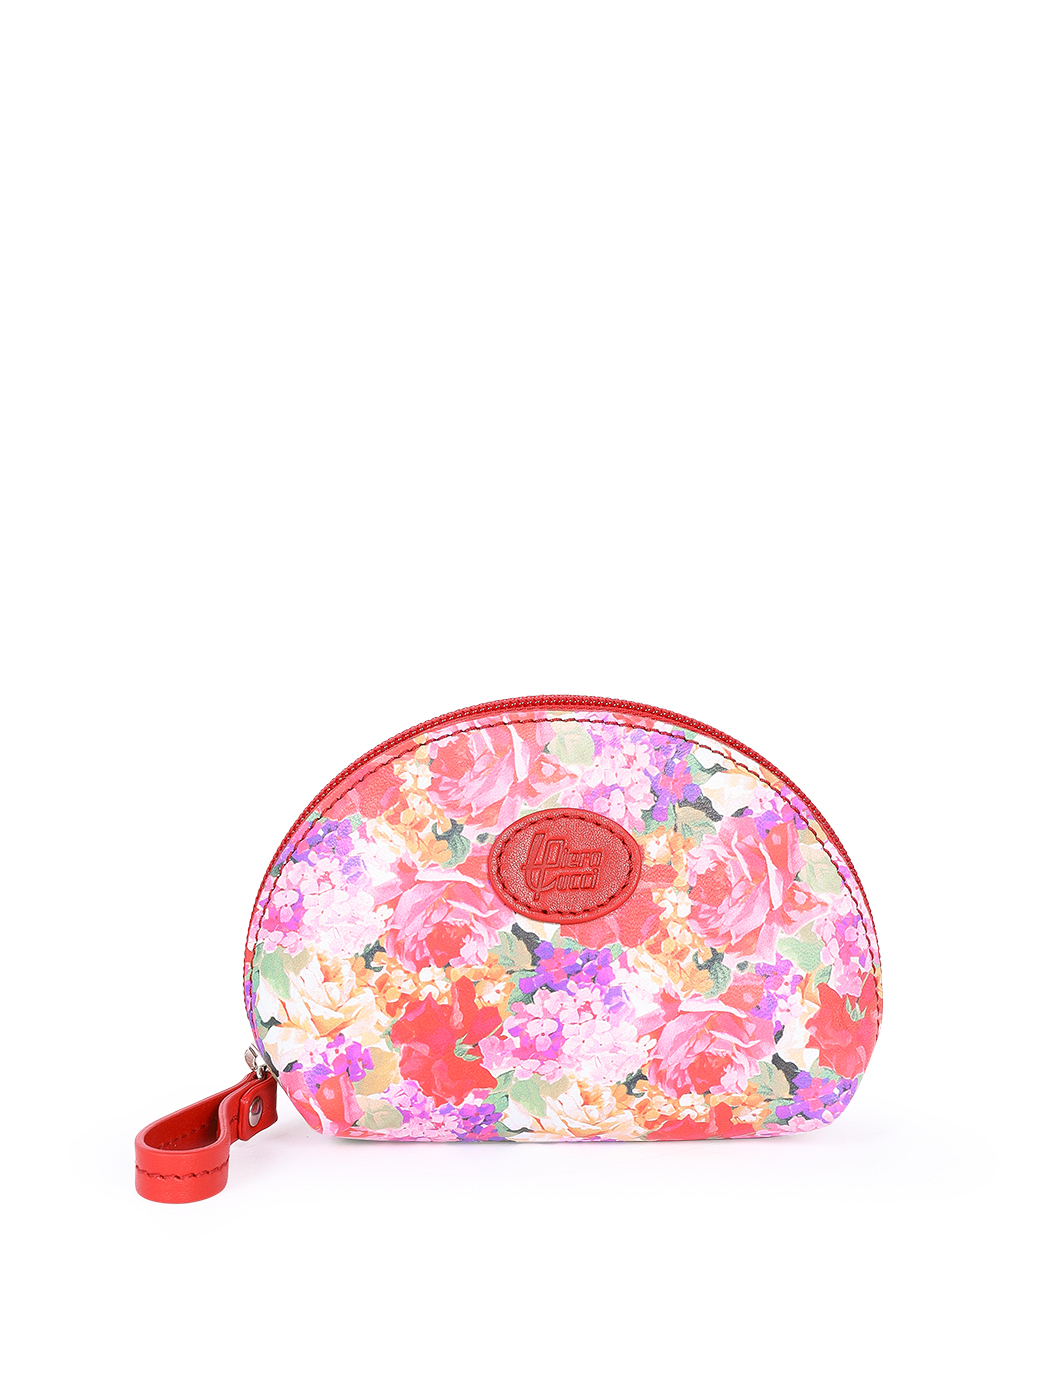 Medium Clamshell Cosmetic Case - Floré Red